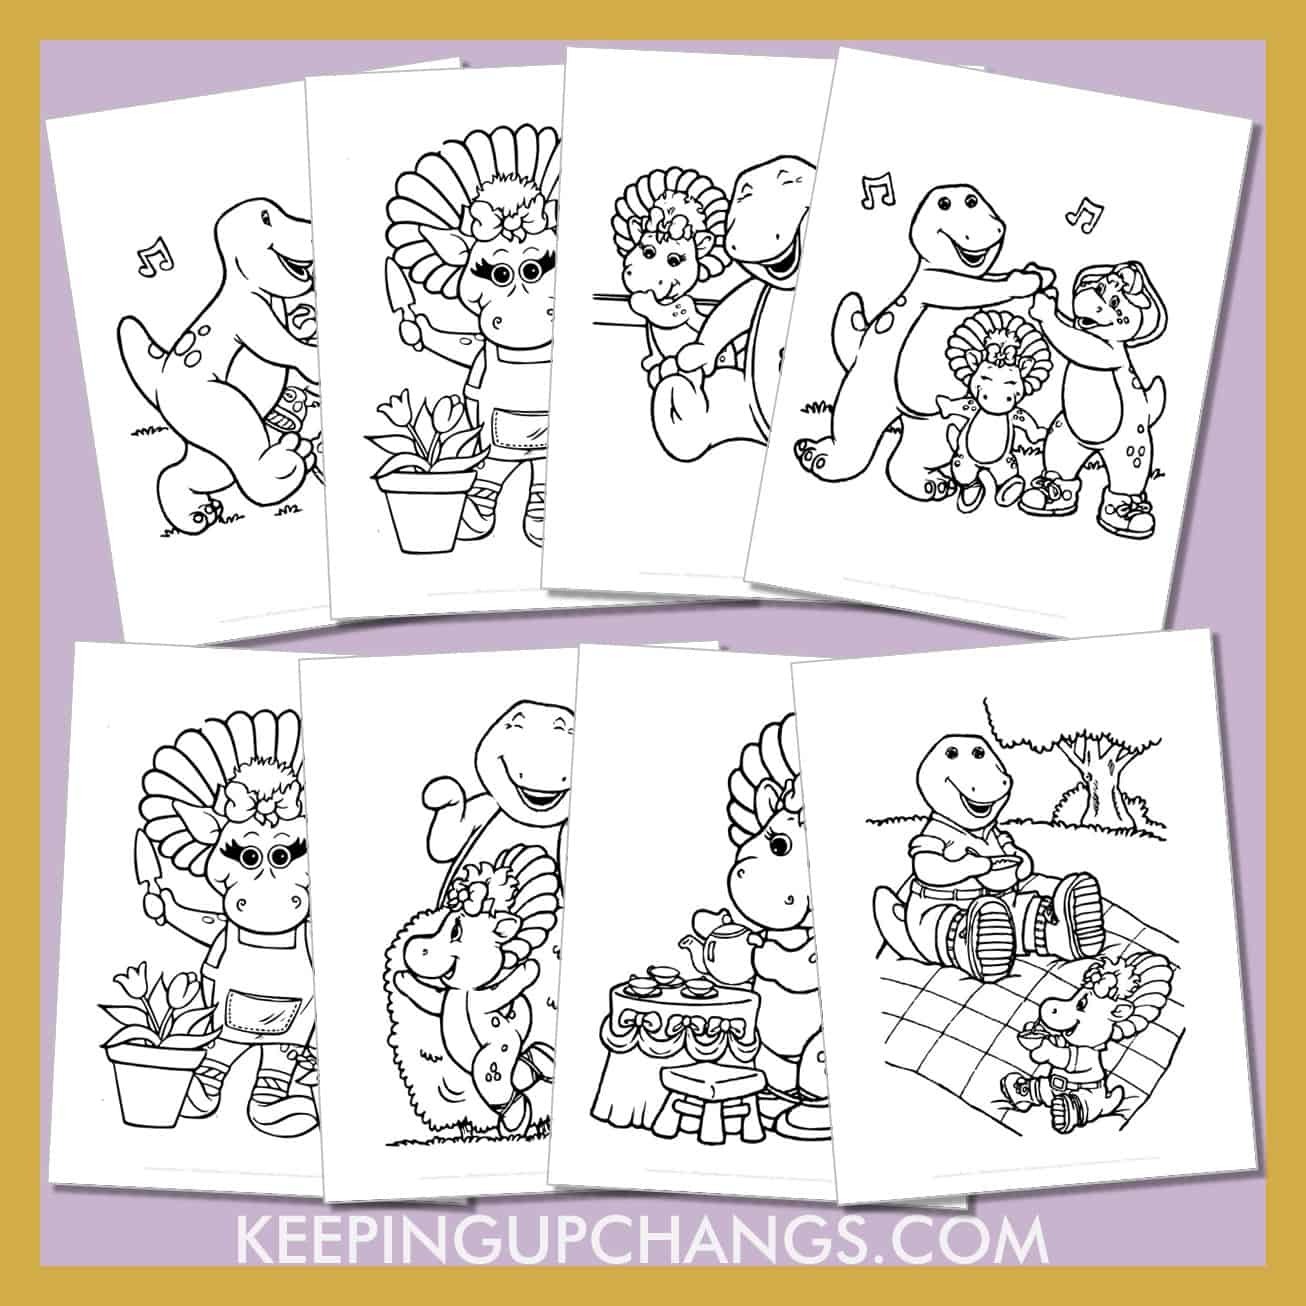 free barney pictures to color for toddlers, kids, adults.